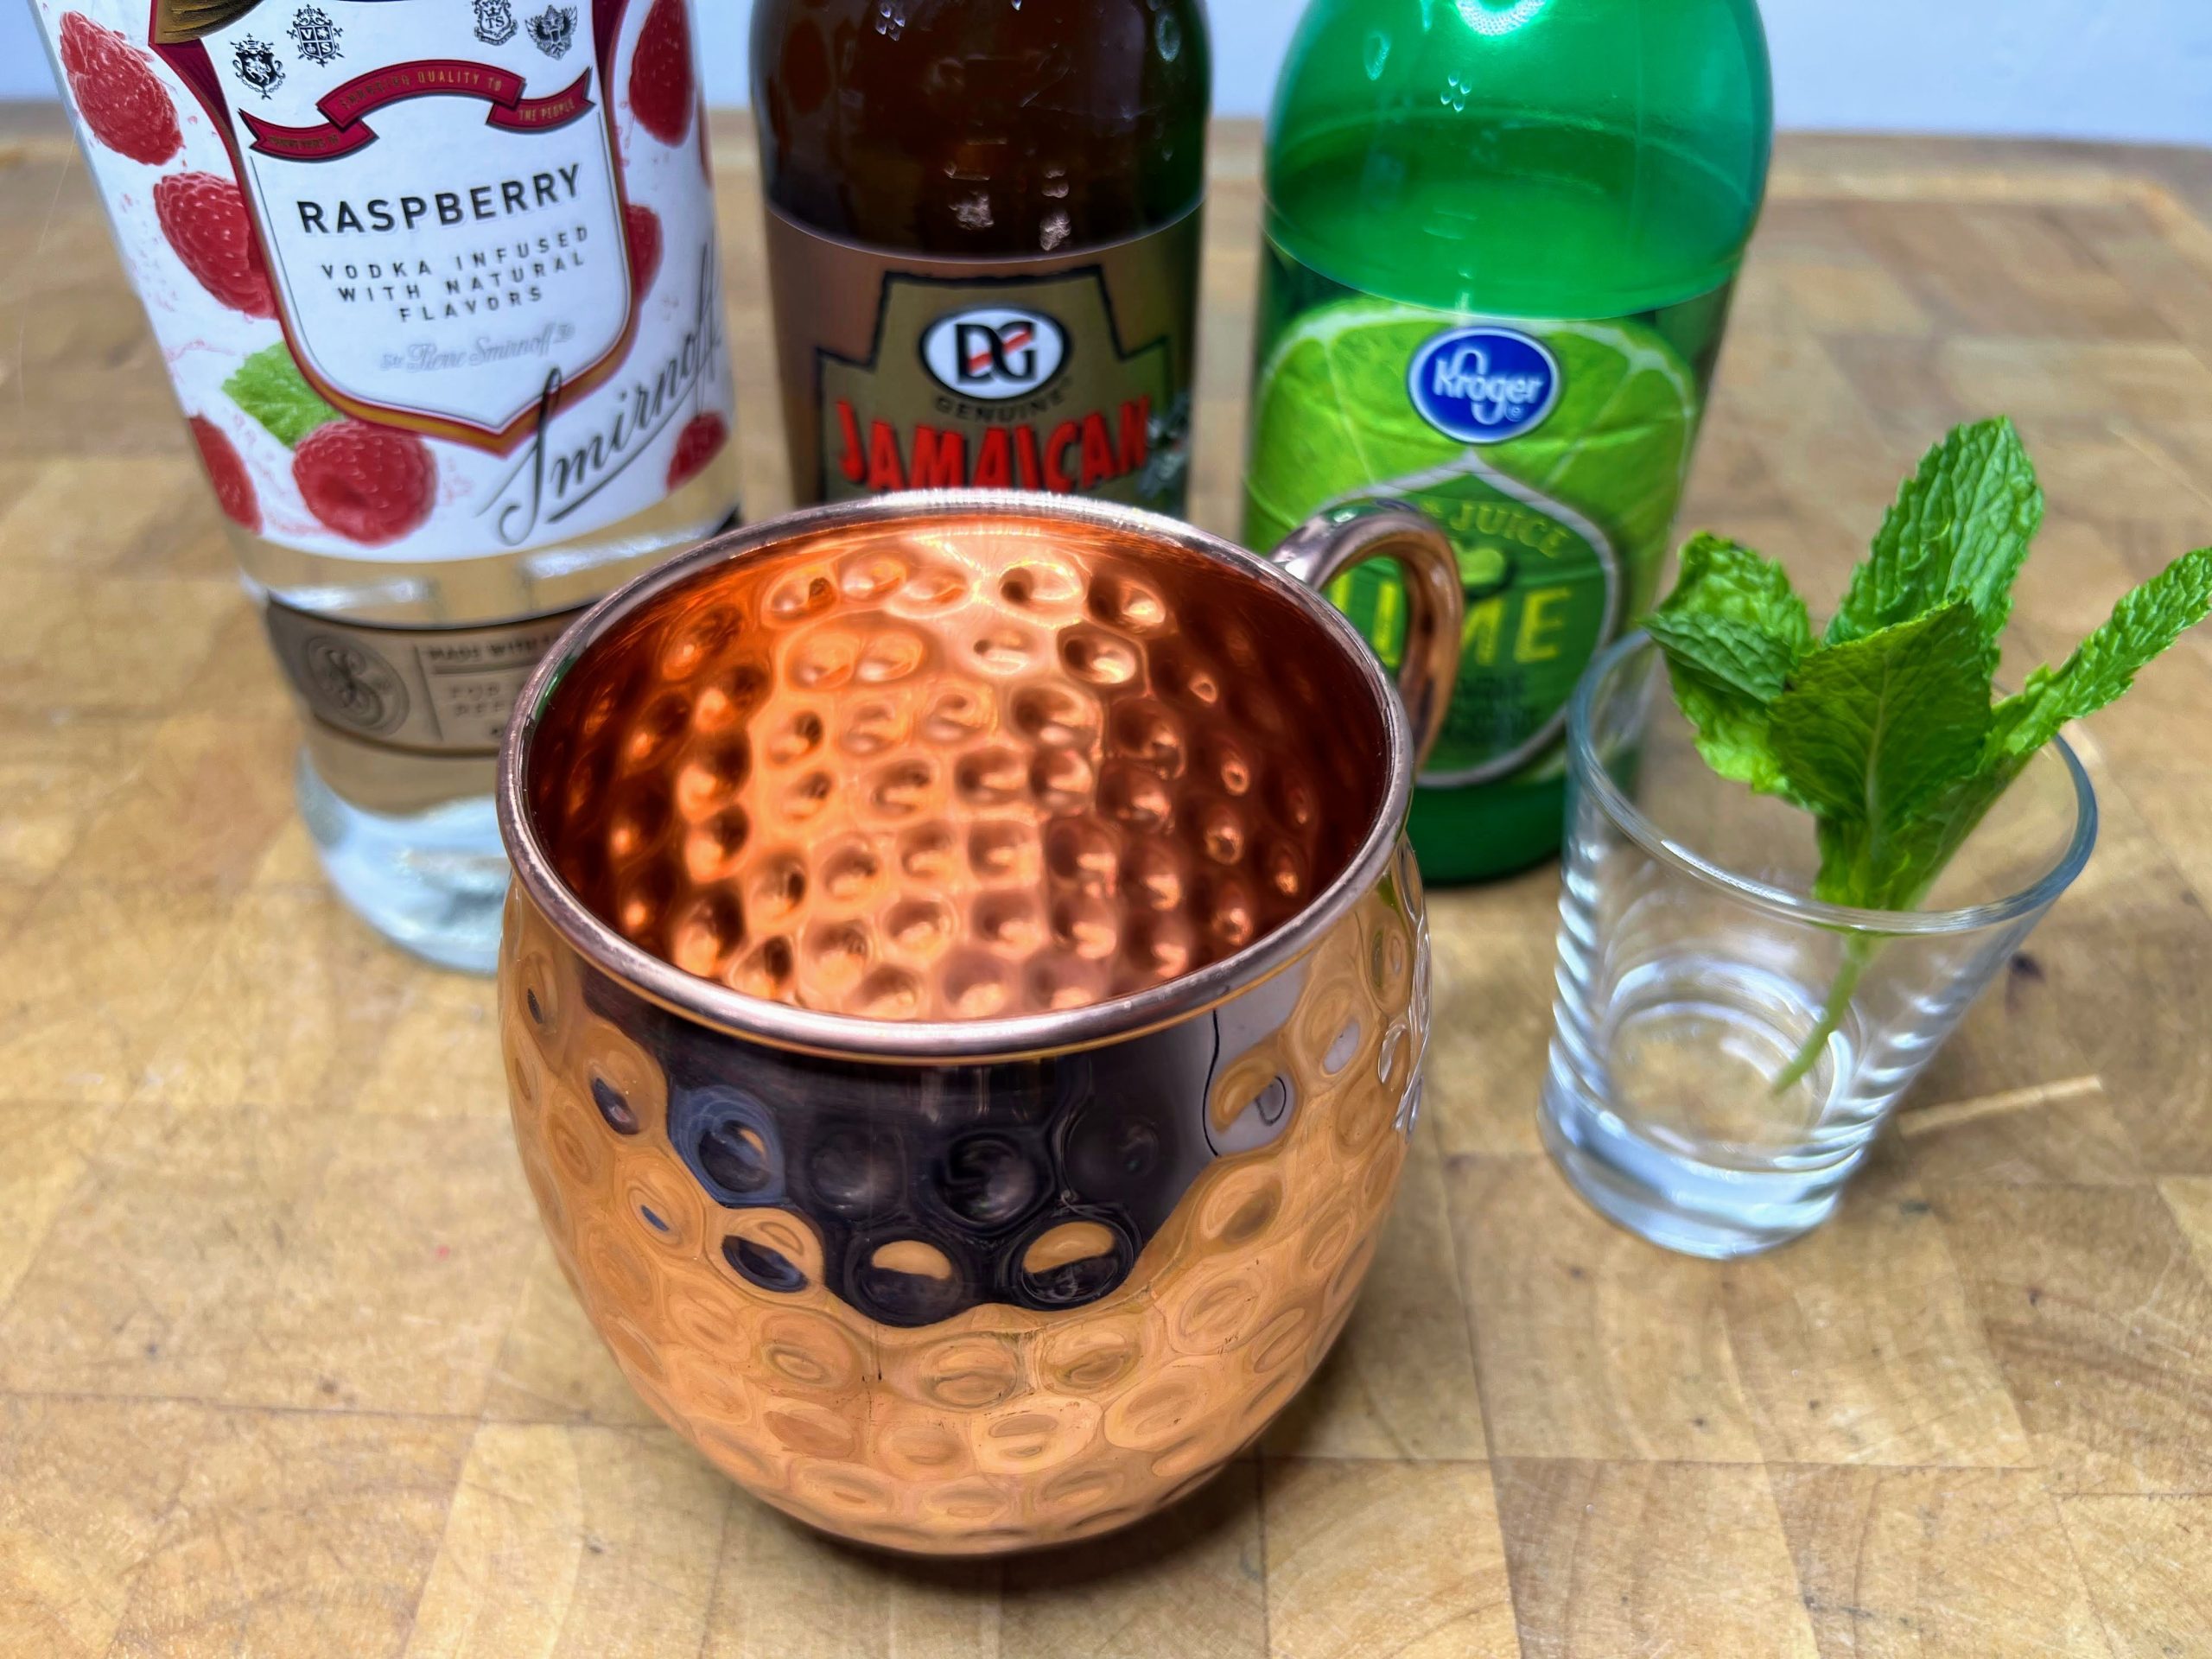 Sprig of mint in a shot glass next to a copper mug and bottles of raspberry vodka, ginger beer and lime juice.